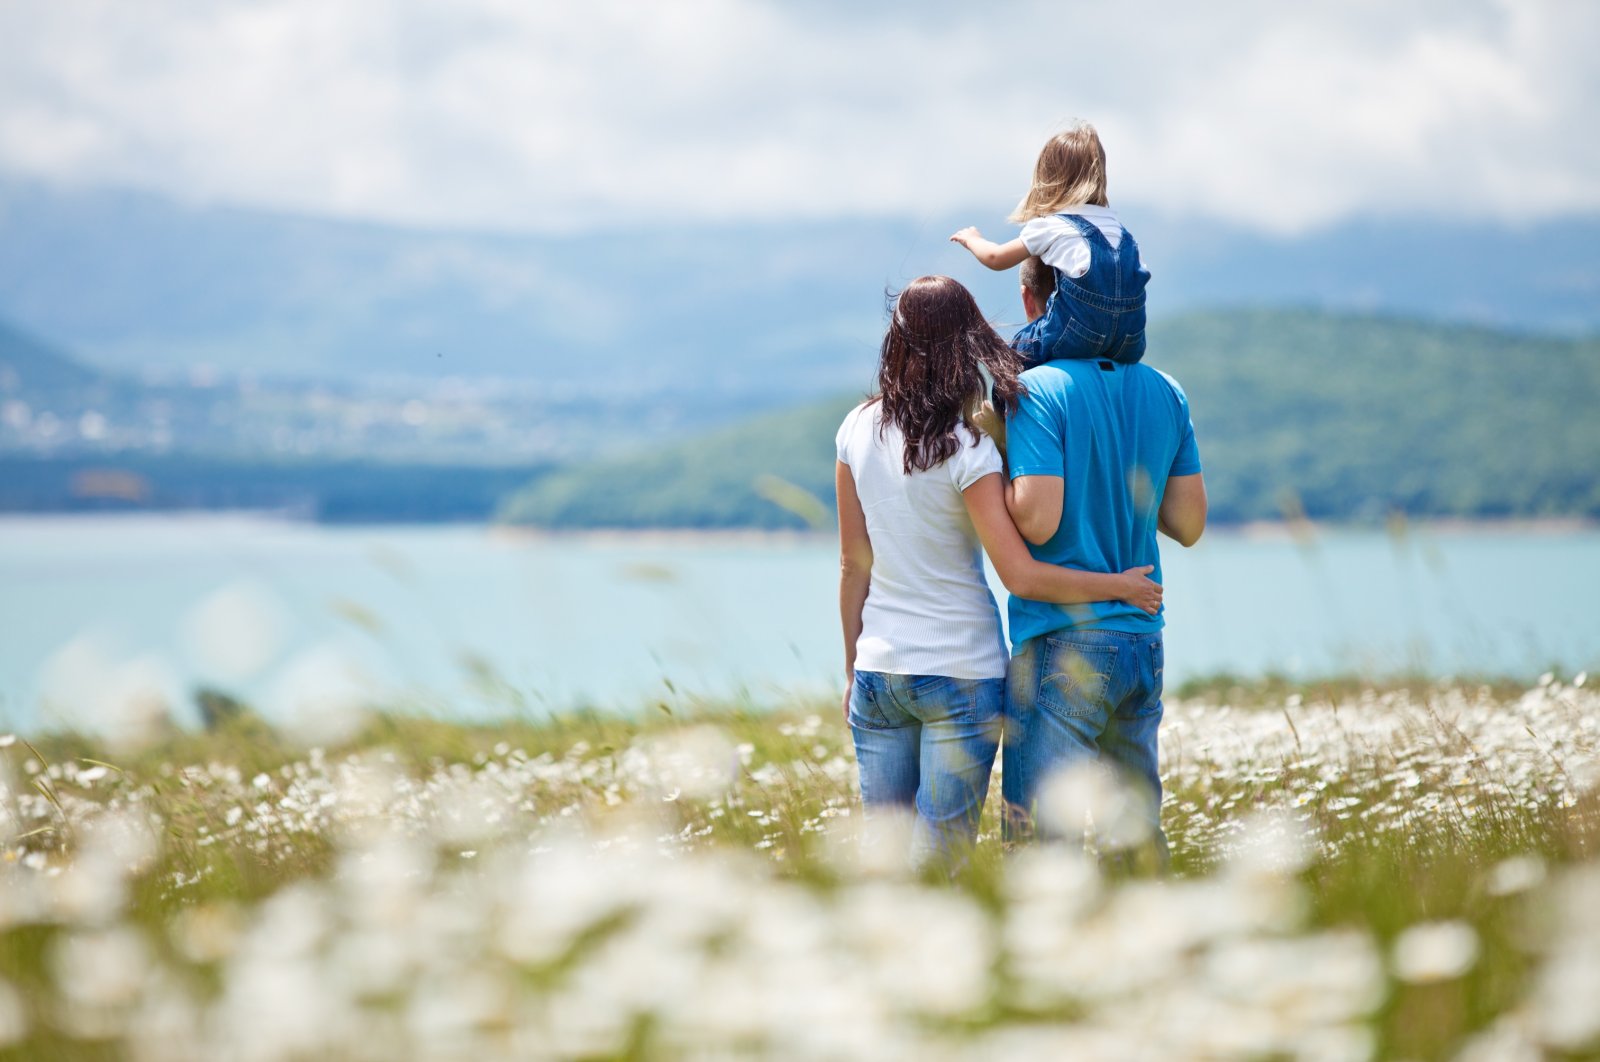 A family standing in front of a lake watches nature (Shutterstock Photo)